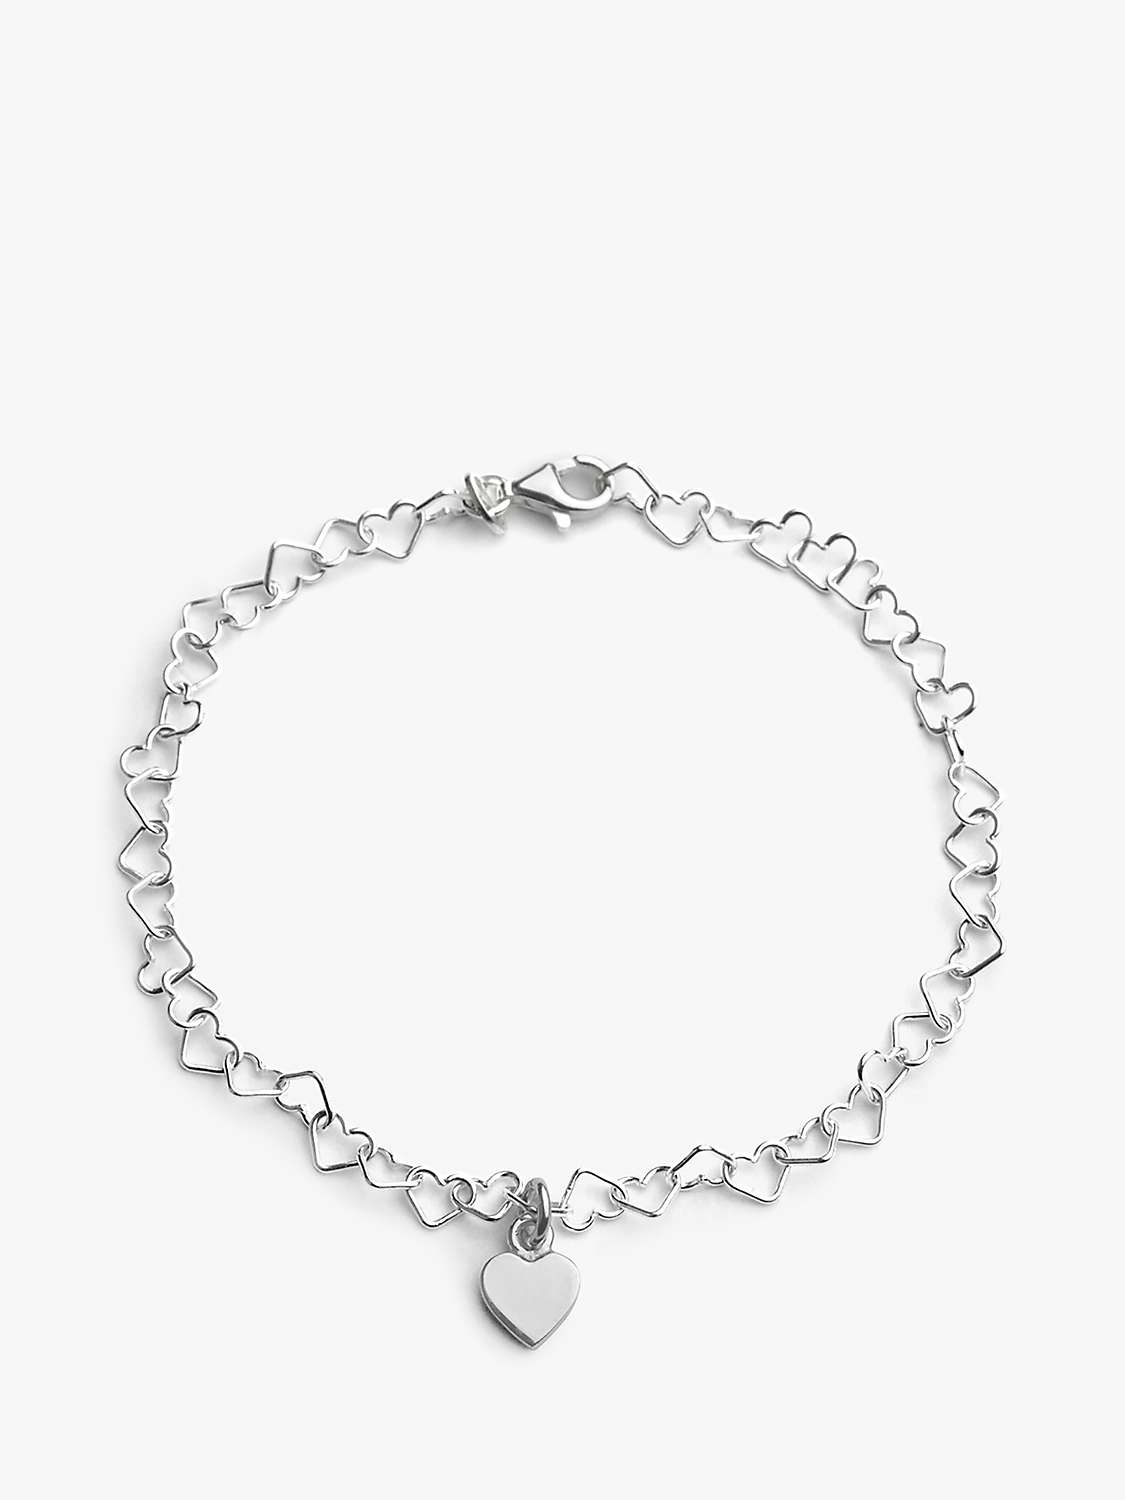 Buy Tales From The Earth Little Girl's Heart Link Bracelet, Silver Online at johnlewis.com